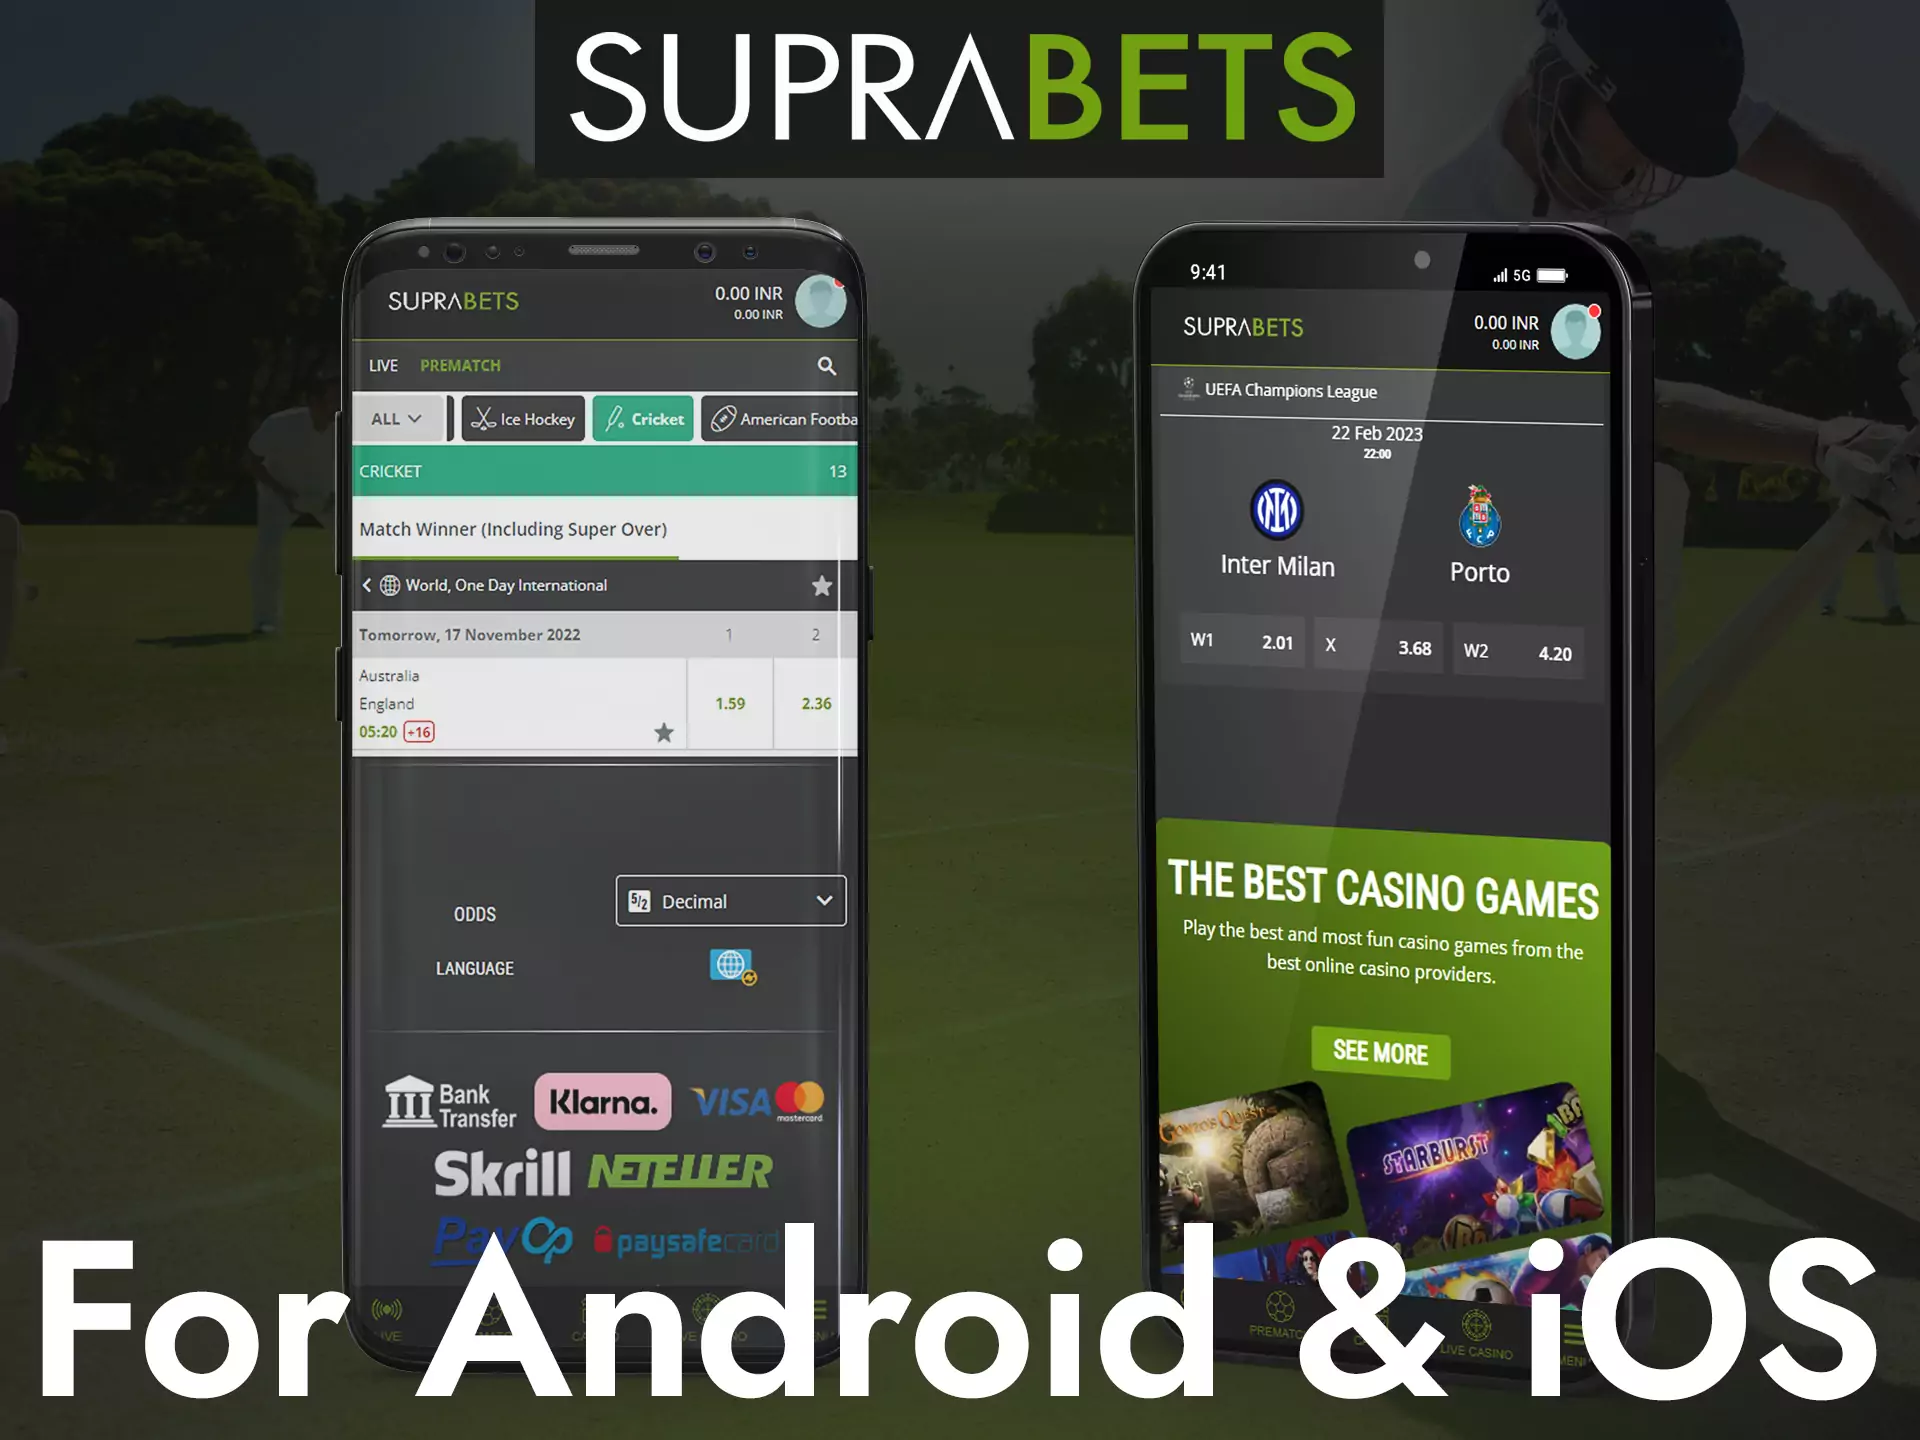 Play and place bets on Suprabets on Android and iOS devices.